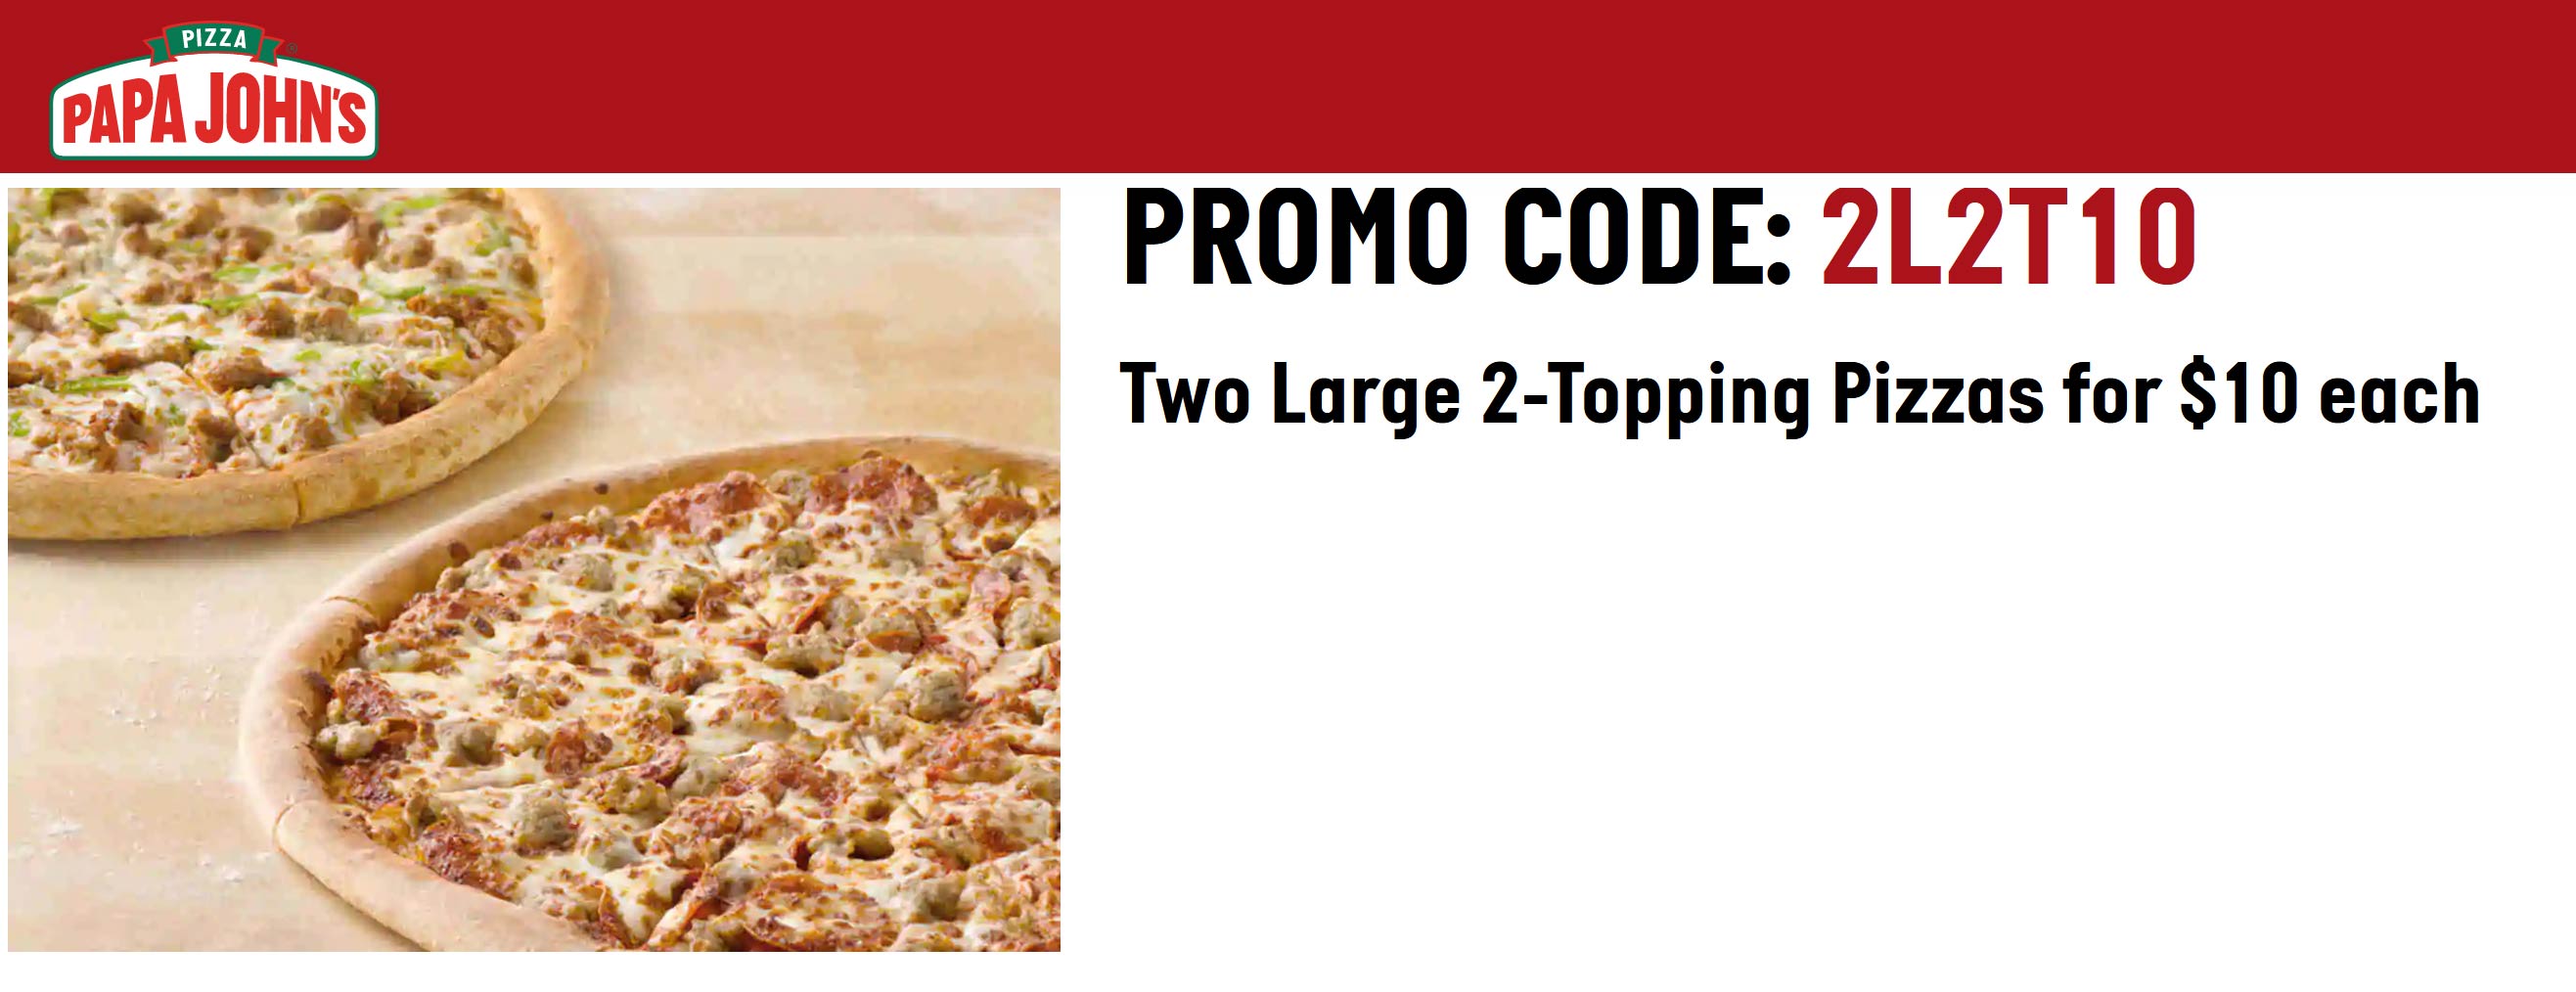 2 large 2 topping pizzas = 20 at Papa Johns via promo code 2L2T10 also